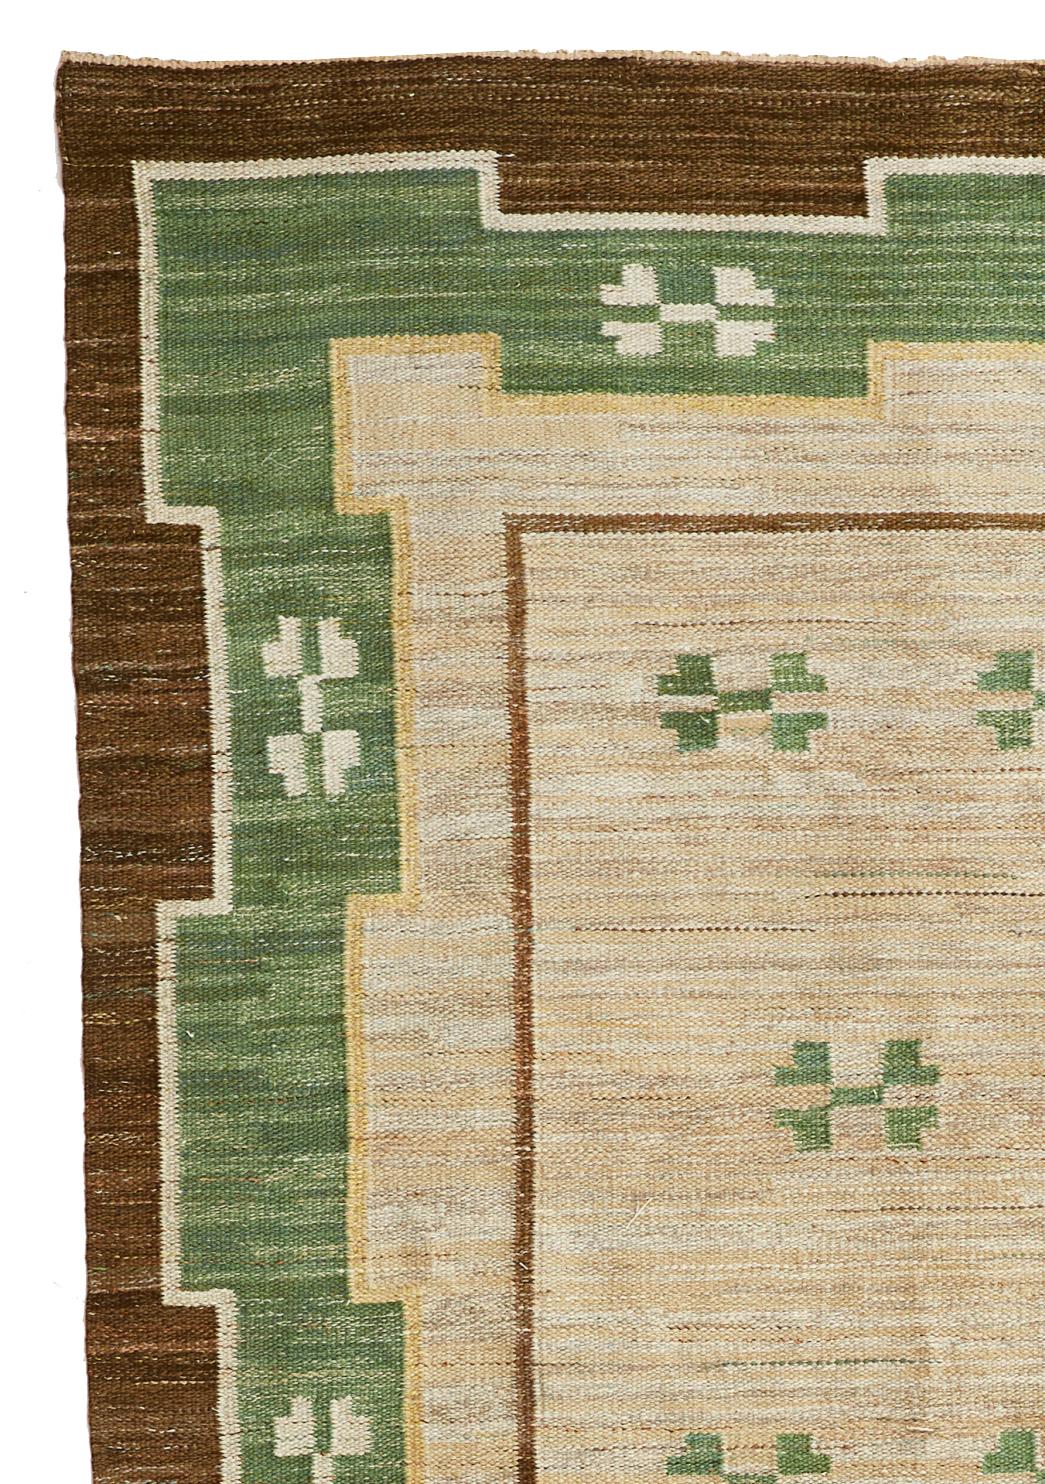 Large midcentury Swedish flat-weave carpet, ‘rölakan’, geometric decor in green and brown, gray center field.

Designed 1950s

W 302 cm, D 205 cm

Materials: Wool
Condition: Good.